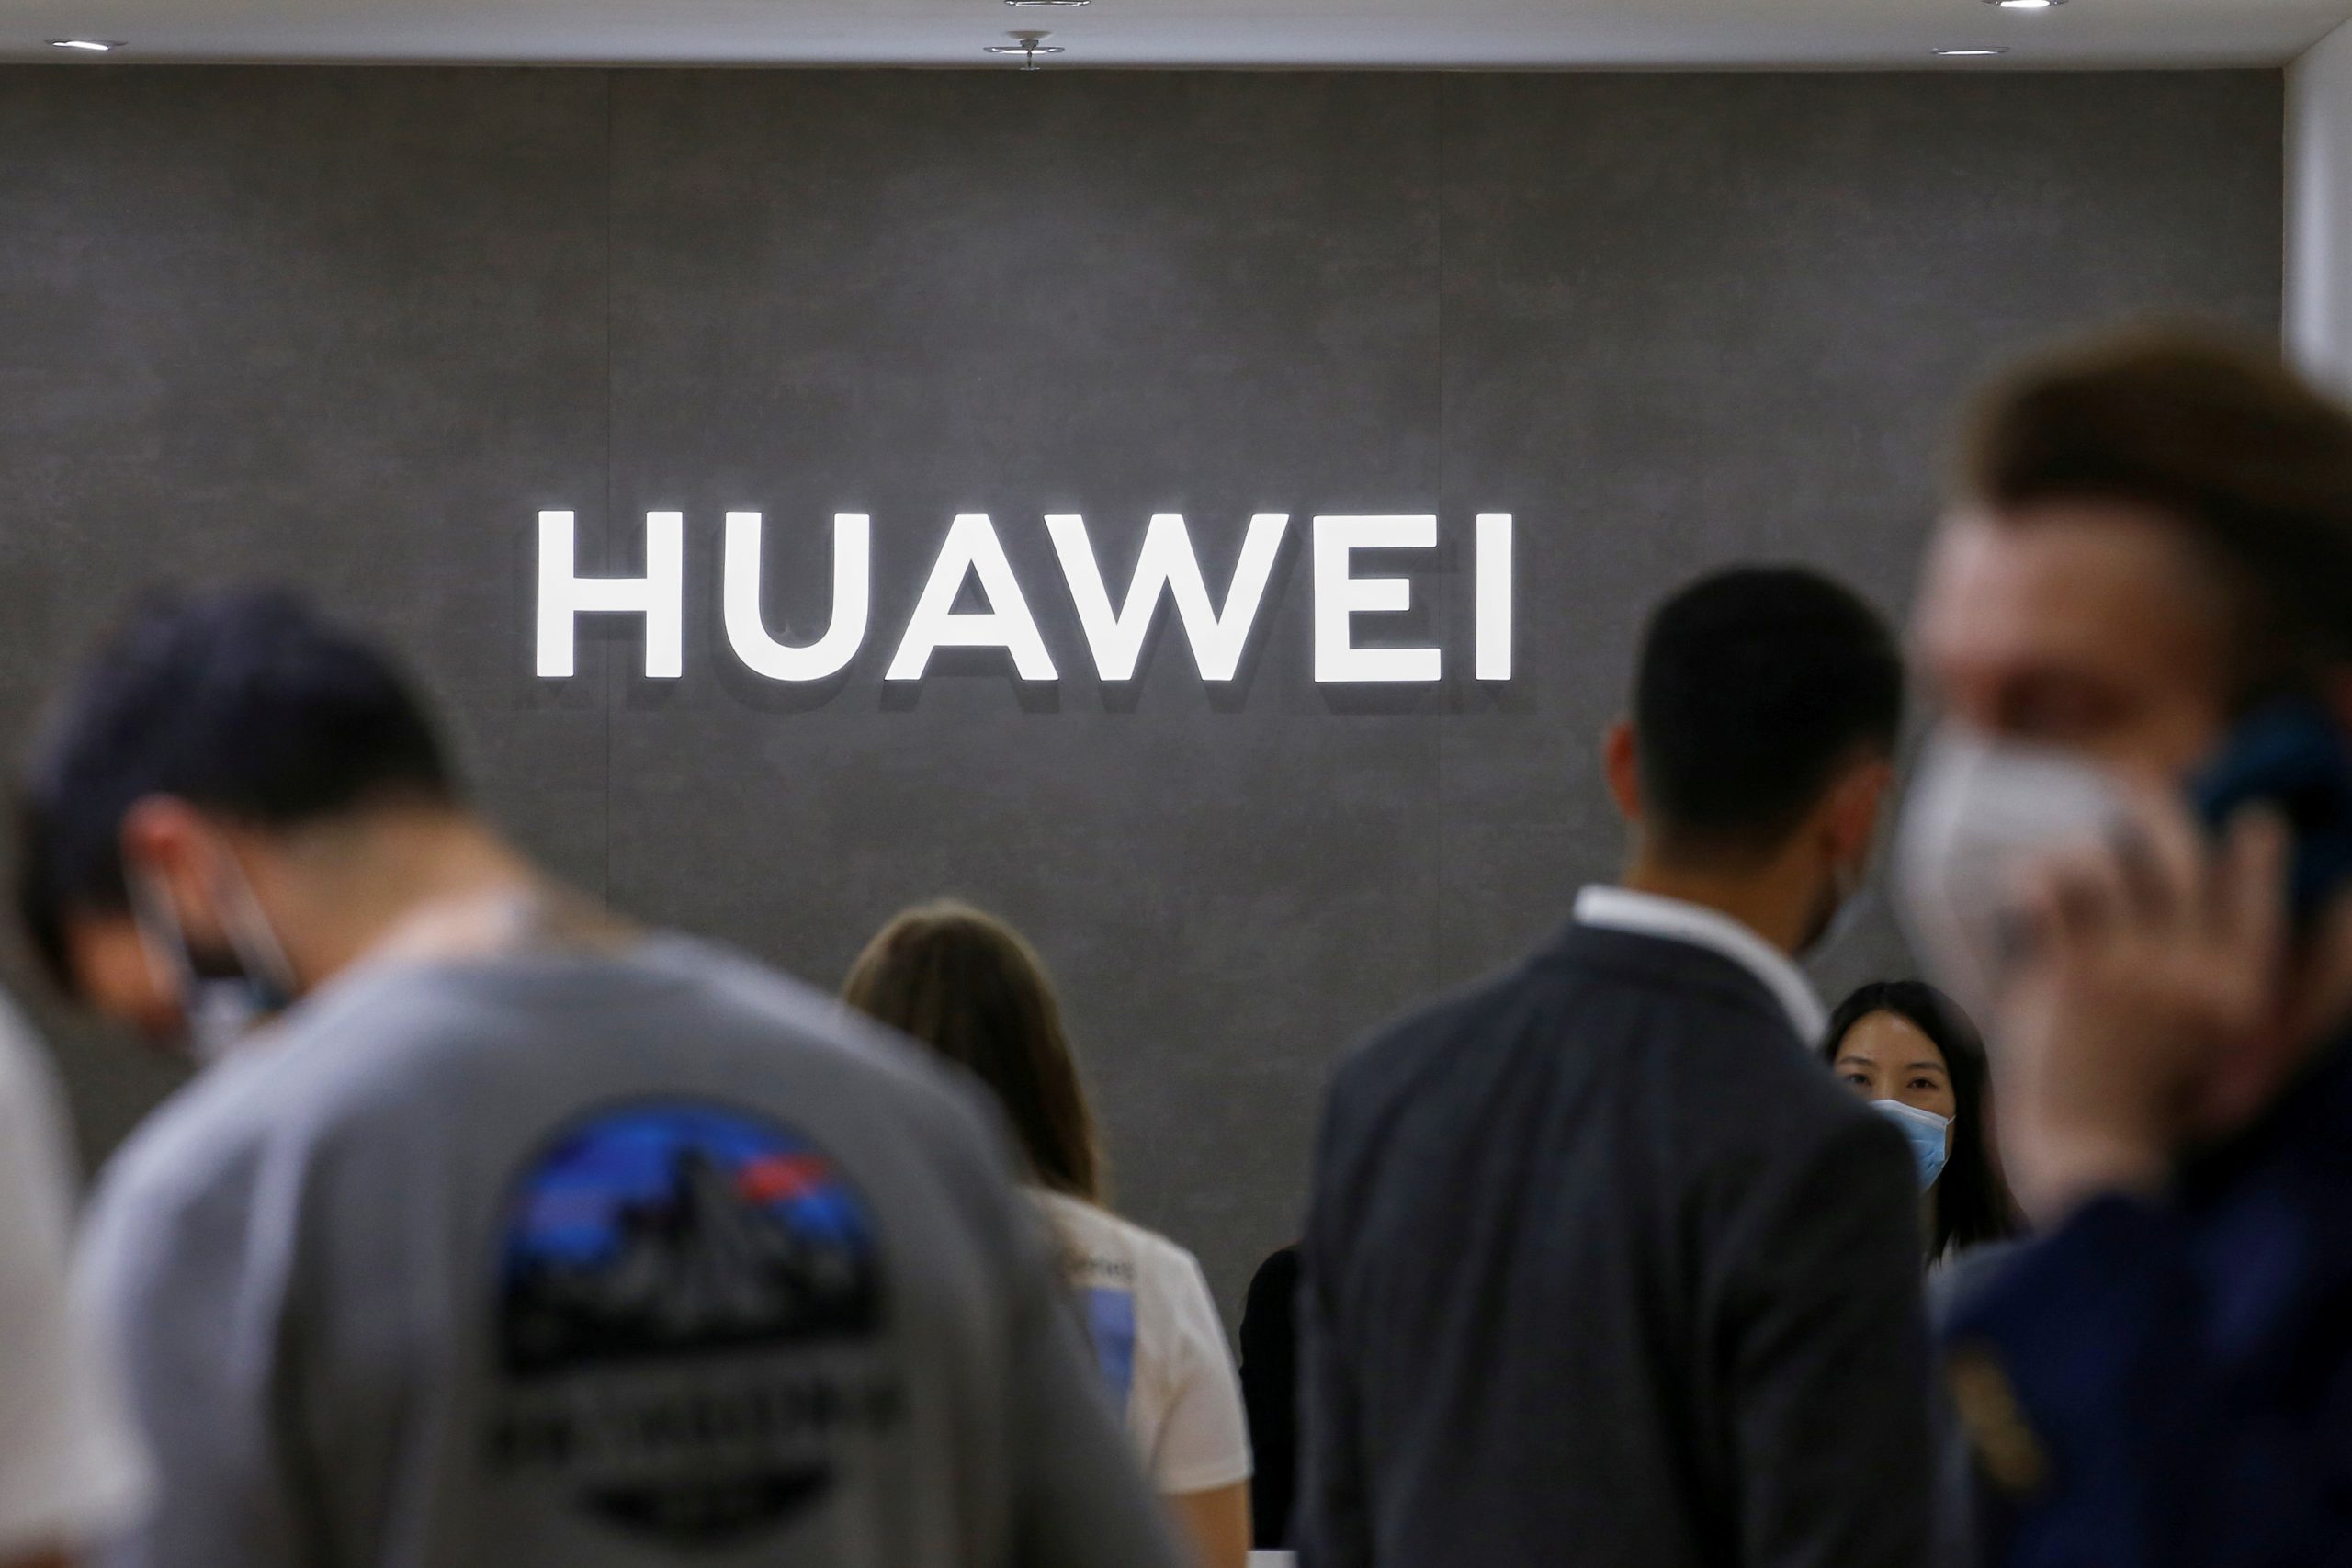 FILE PHOTO: The Huawei logo is seen at the IFA consumer technology fair, in Berlin FILE PHOTO: The Huawei logo is seen at the IFA consumer technology fair, amid the coronavirus disease (COVID-19) outbreak, in Berlin, Germany September 3, 2020.  REUTERS/Michele Tantussi/File Photo MICHELE TANTUSSI